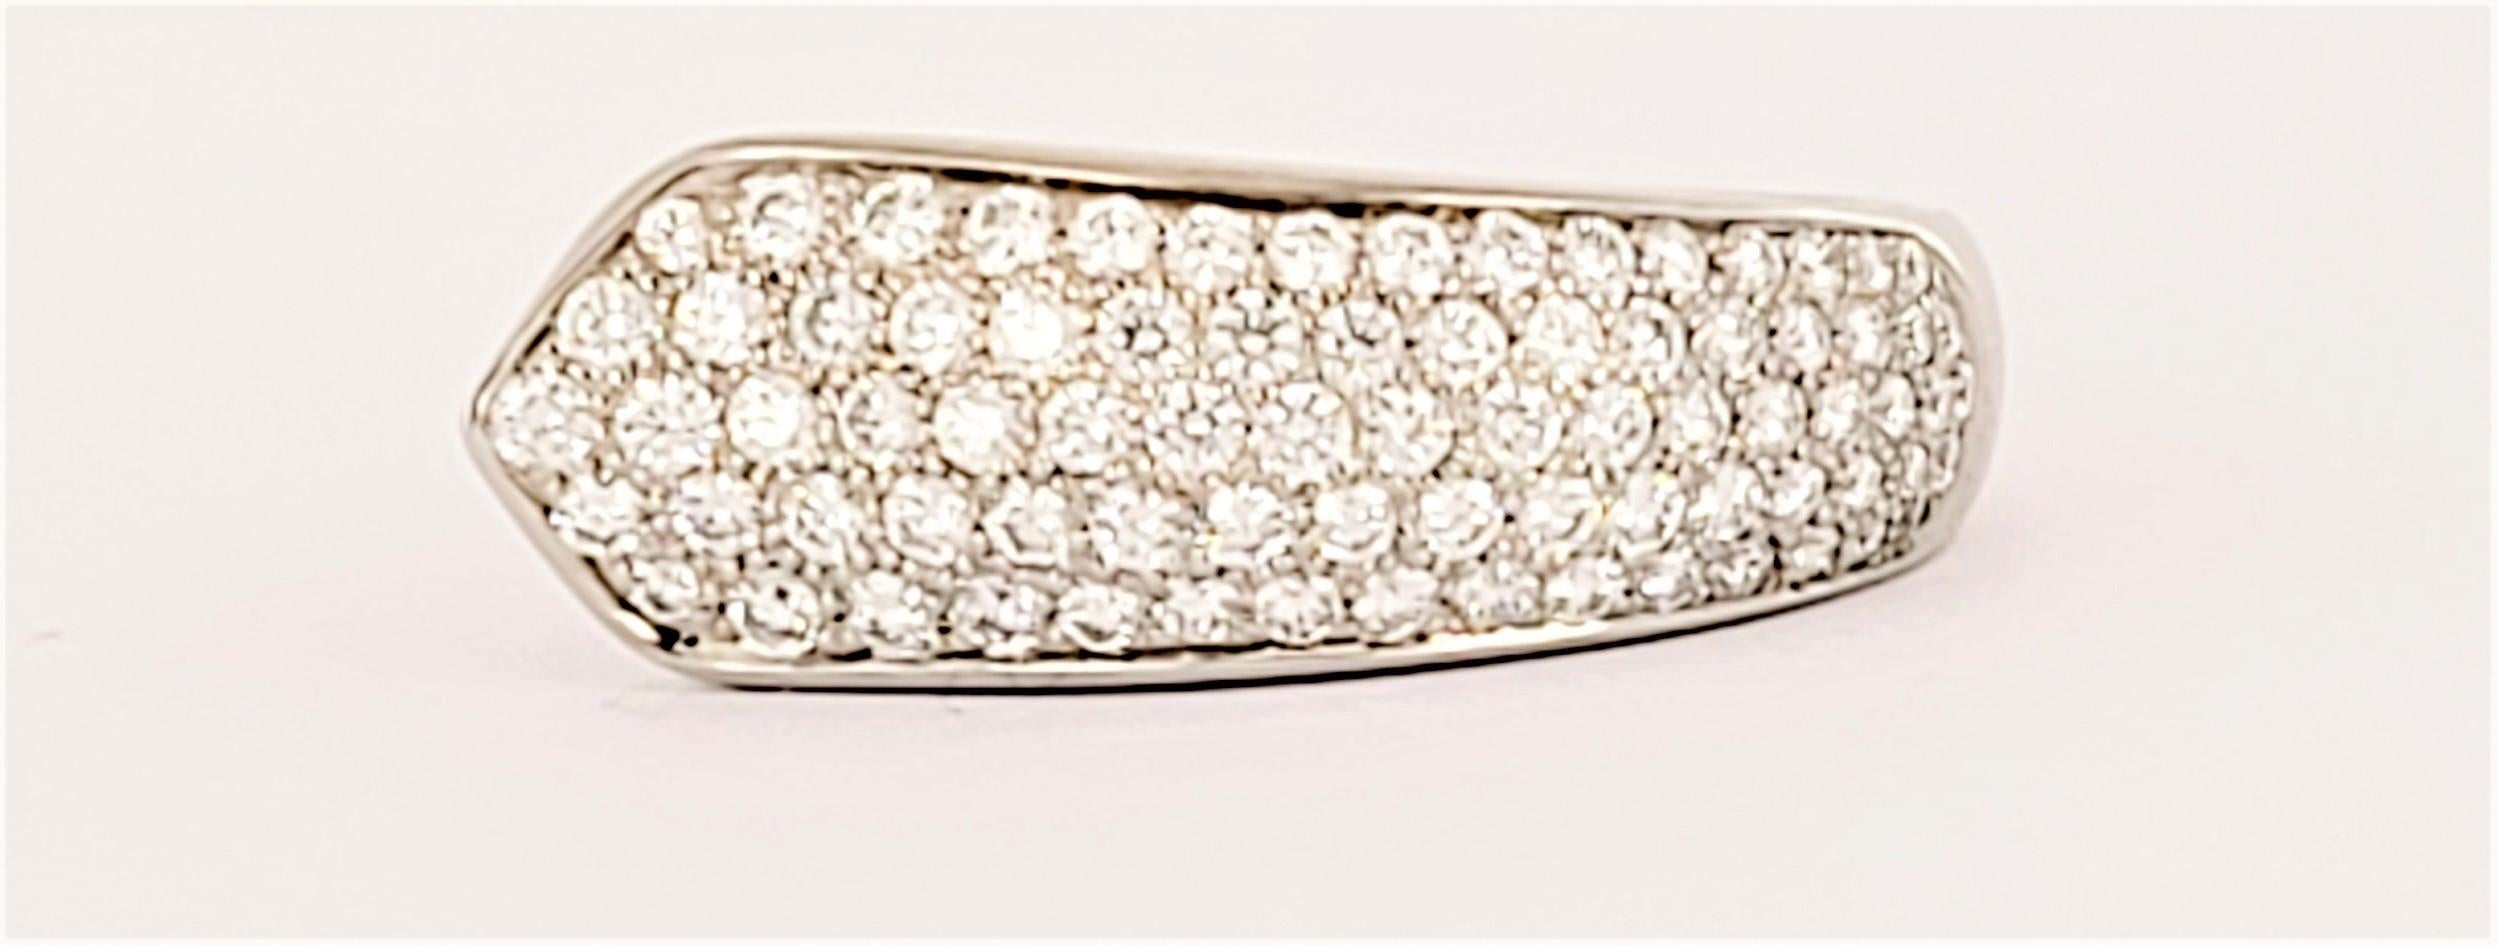 Cartier Ruban Diamond White Gold Ring Size 7 In Excellent Condition For Sale In New York, NY